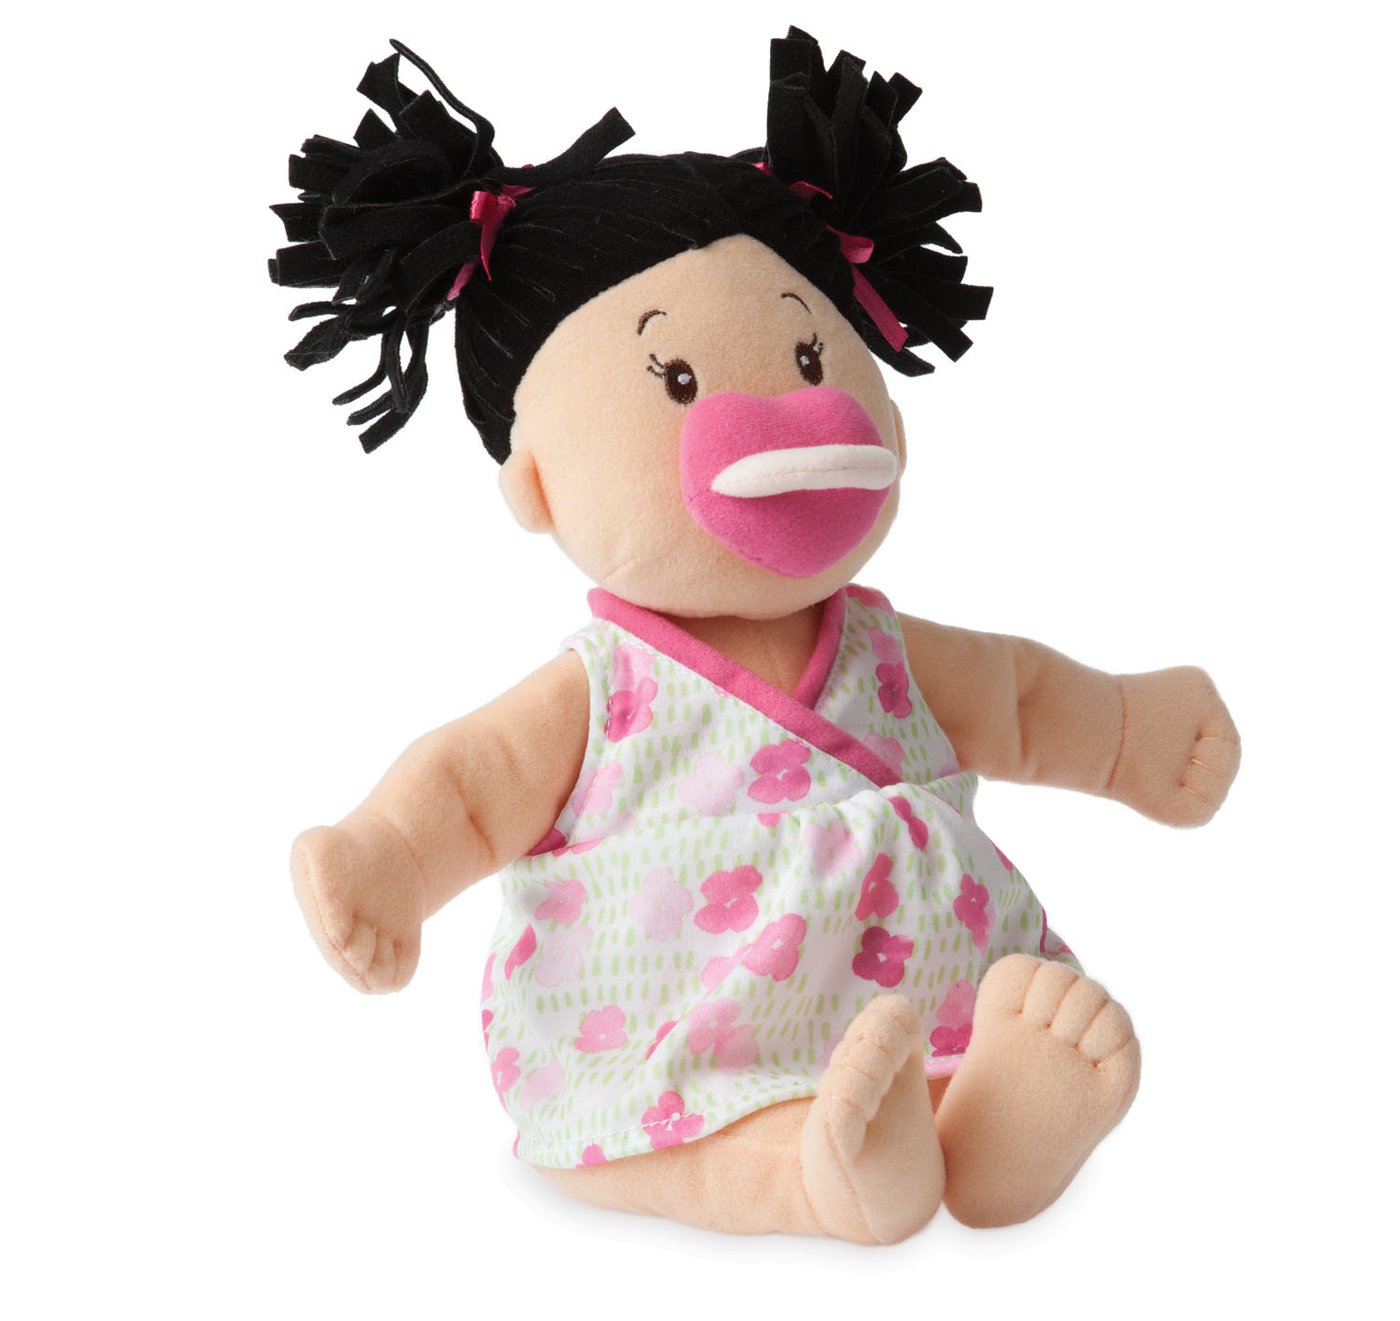 Angle View of Manhattan Toy Baby Stella Peach Doll with Black Pigtails Toy - ANB Baby 